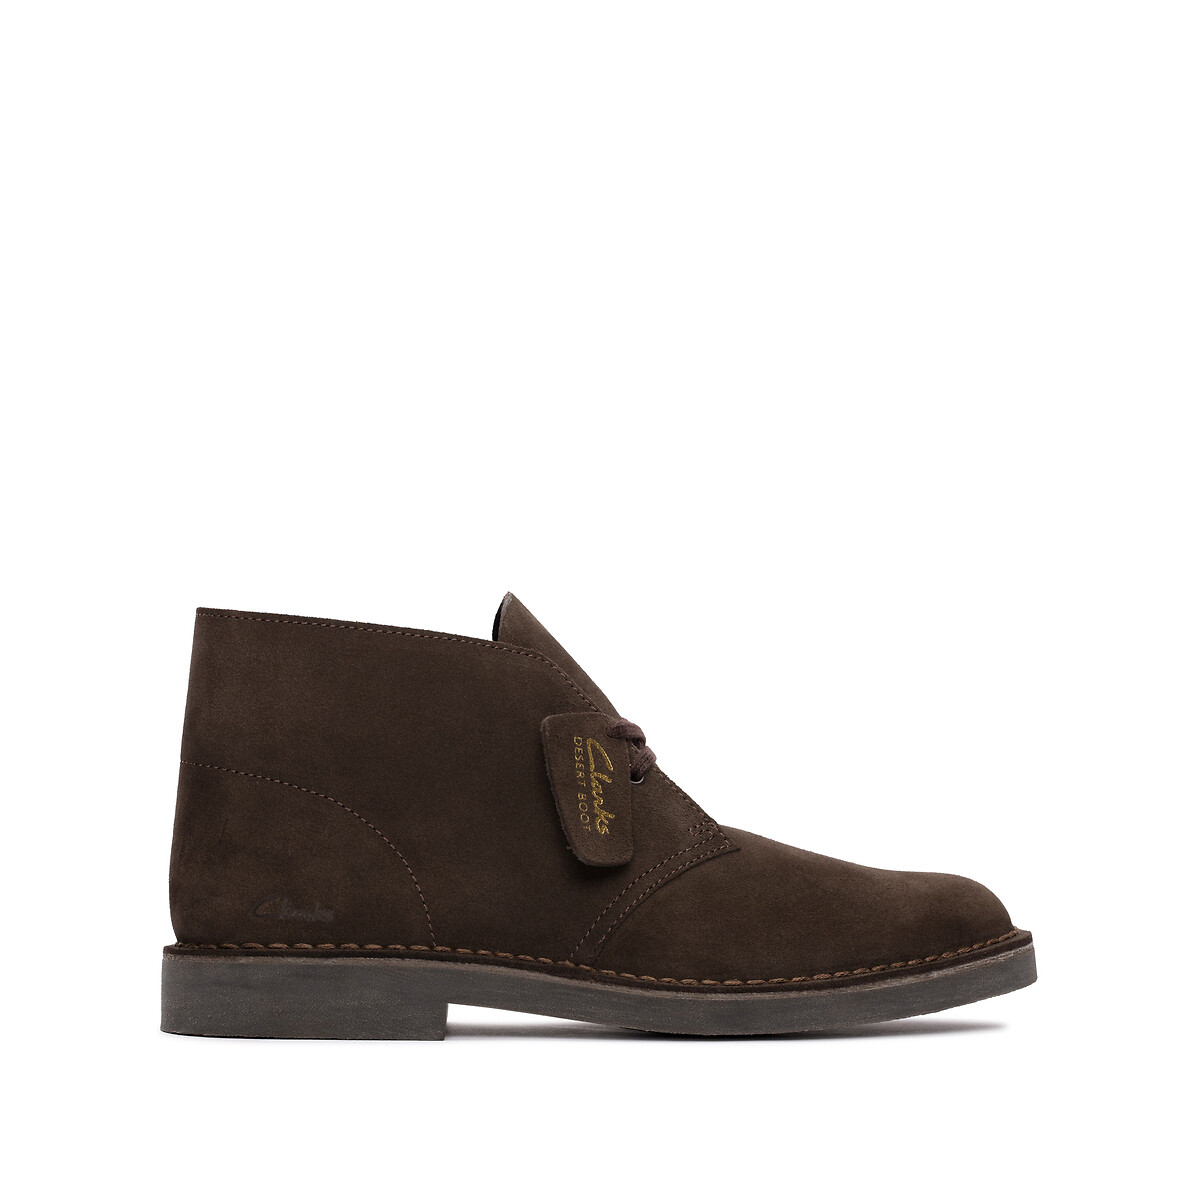 Image of Evo Suede Desert Boots